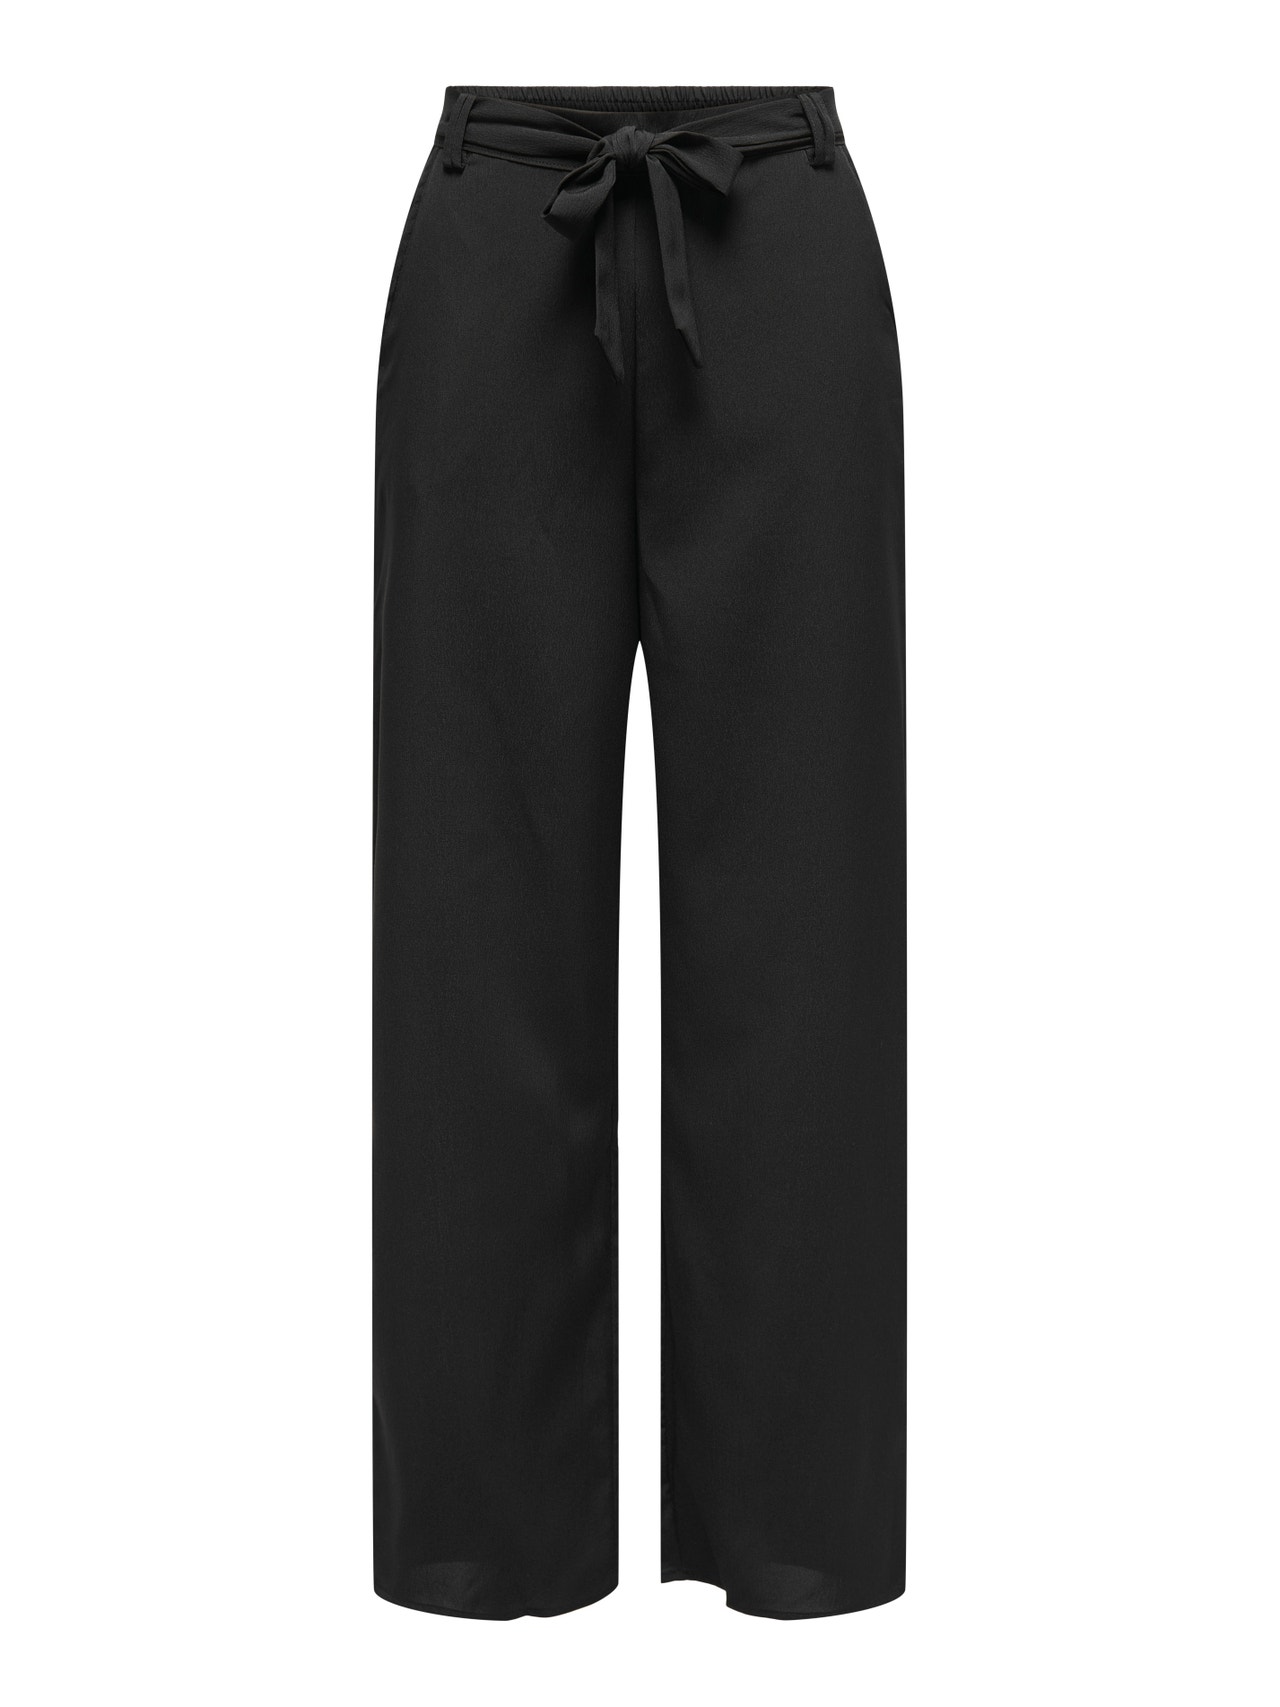 ONLY Trousers with tie belt -Black - 15335560